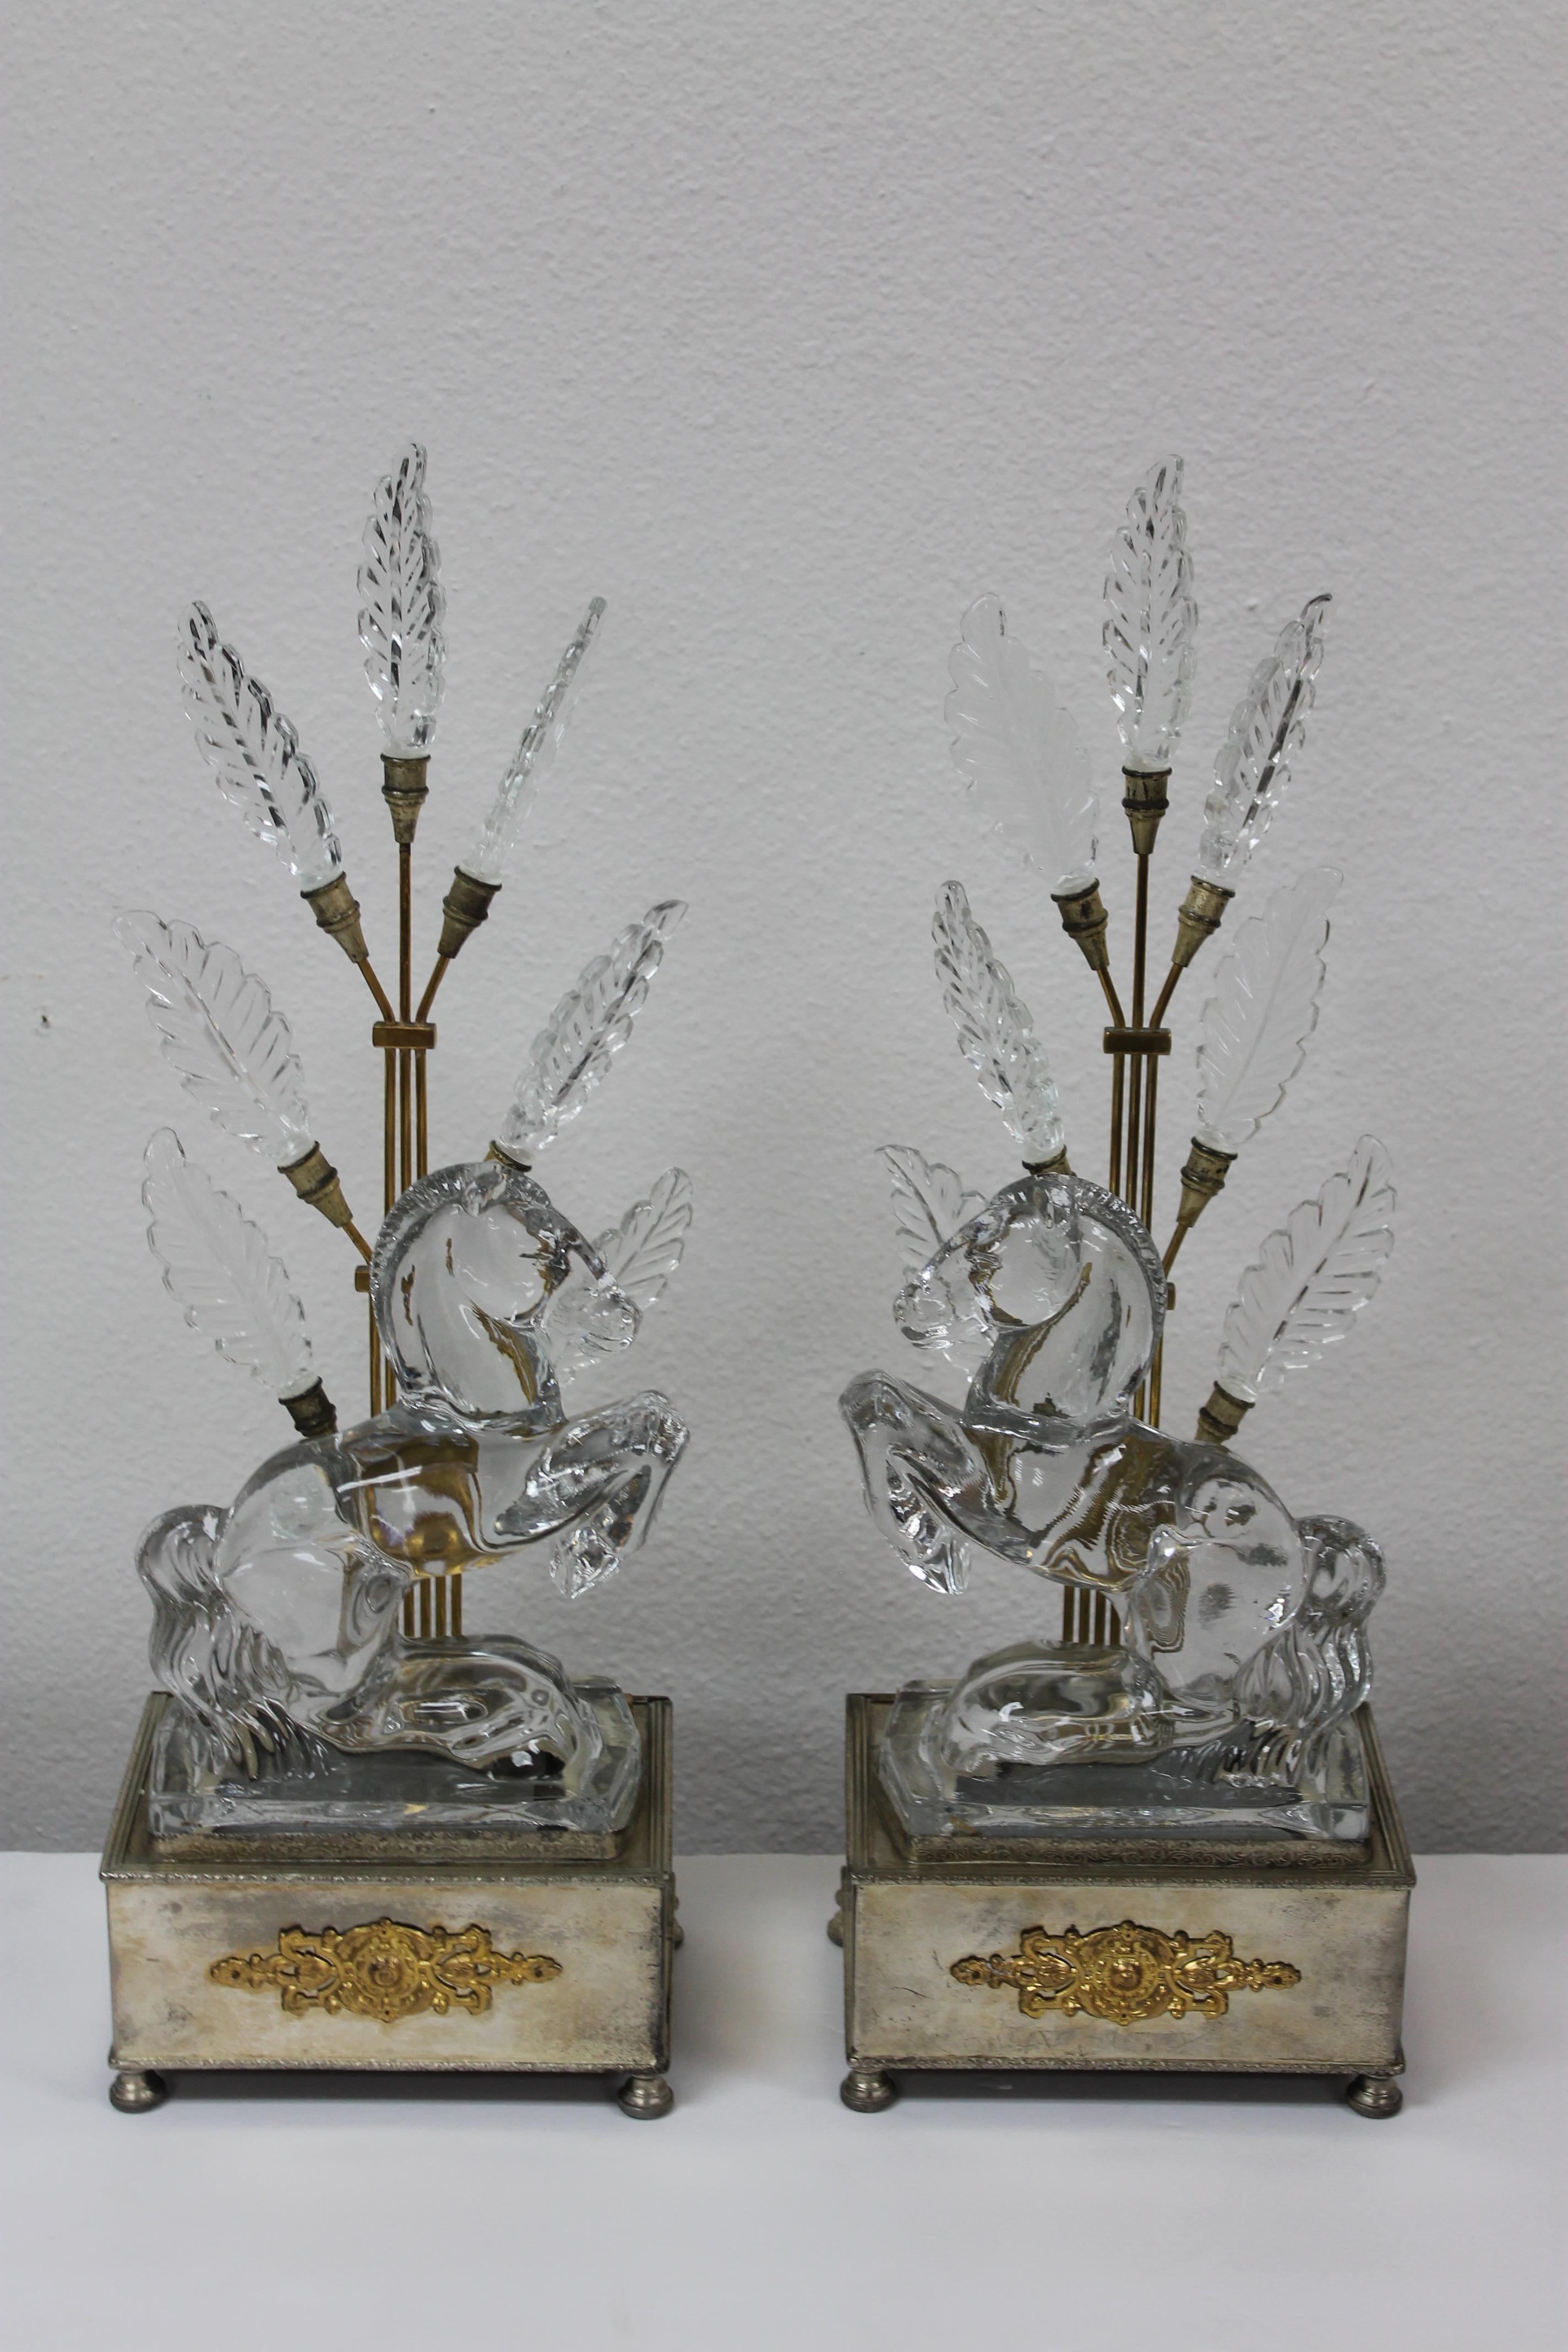 A matched pair of early Hollywood Regency accent lamps featuring clear crystal horses in front of stylized bronze trees with crystal leaves. Bases are brass with a silver wash. These are circa late 1930s-early 1940s. Total height is 18